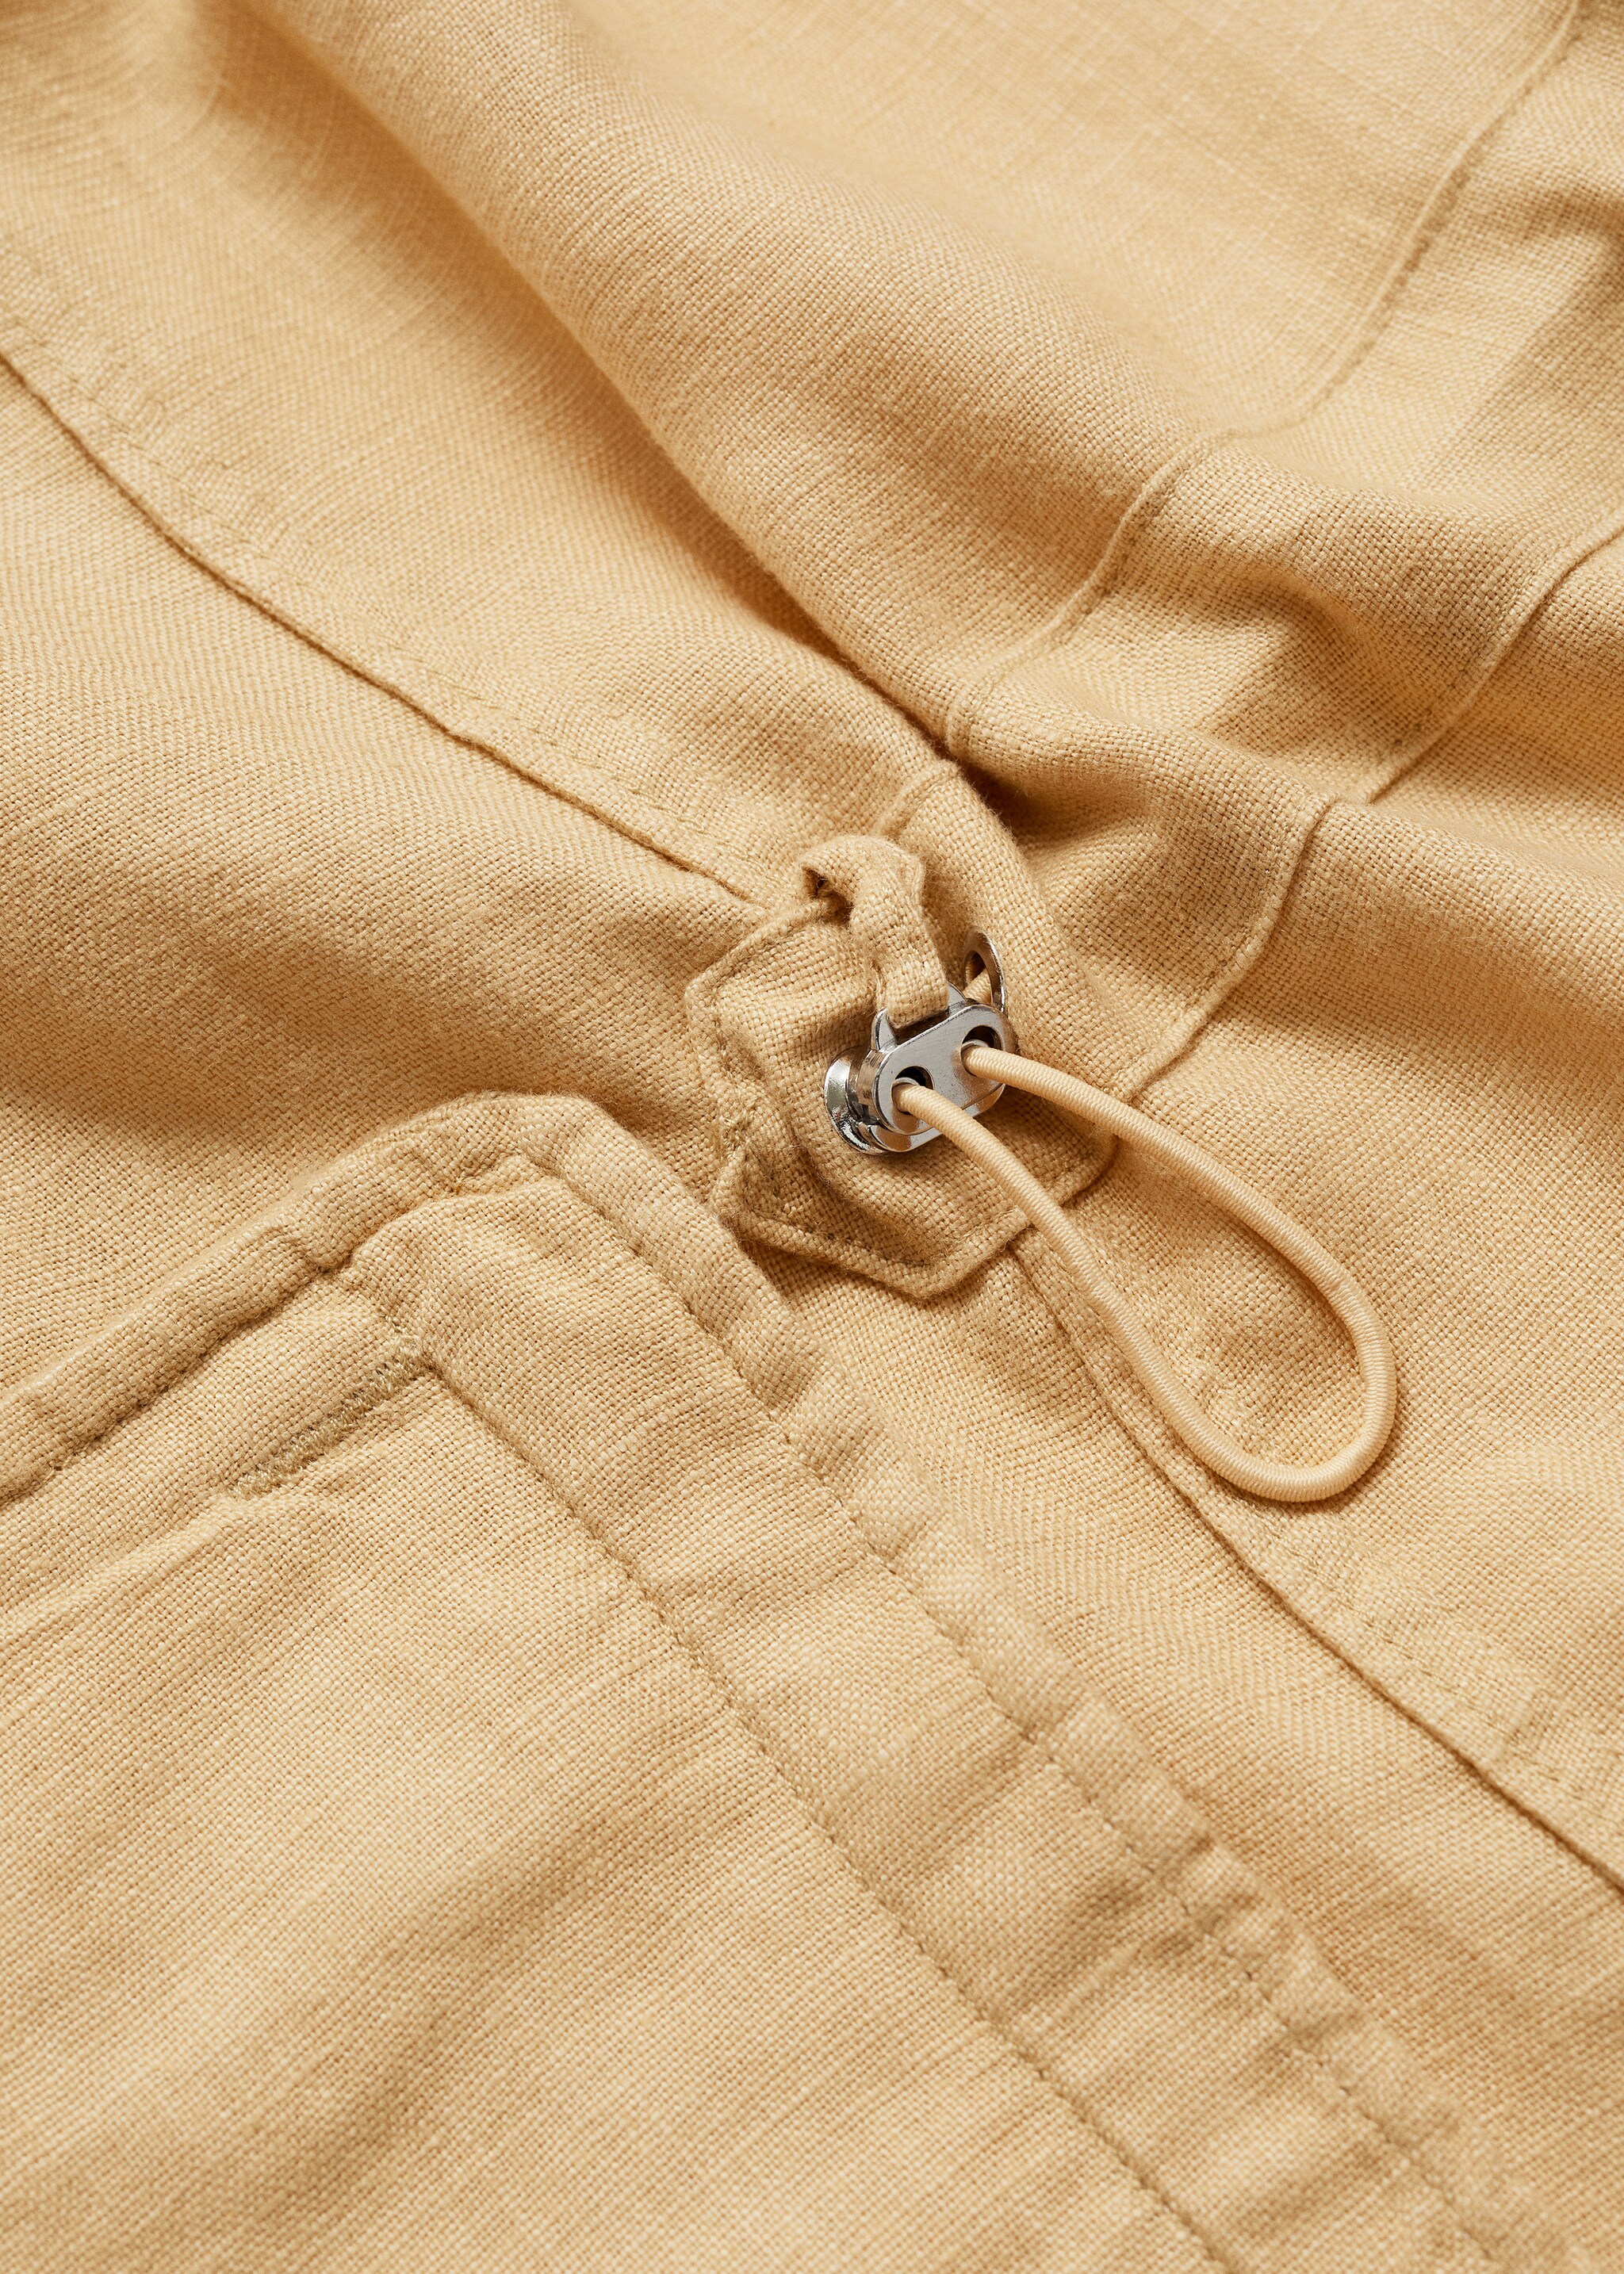 100% linen overshirt with pockets - Details of the article 0